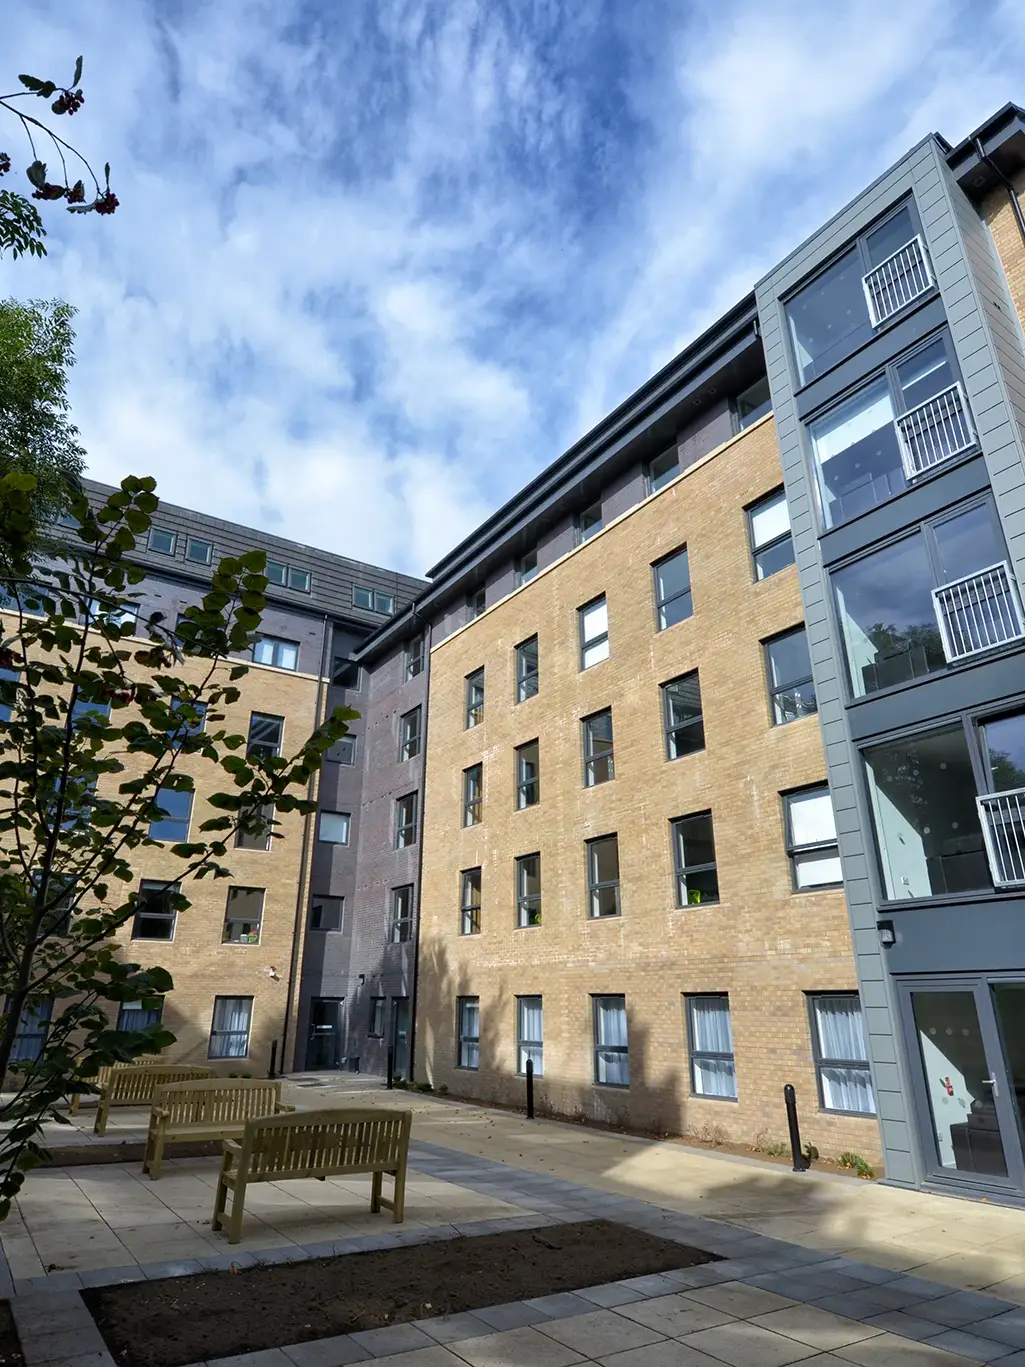 Student Accommodation Projects